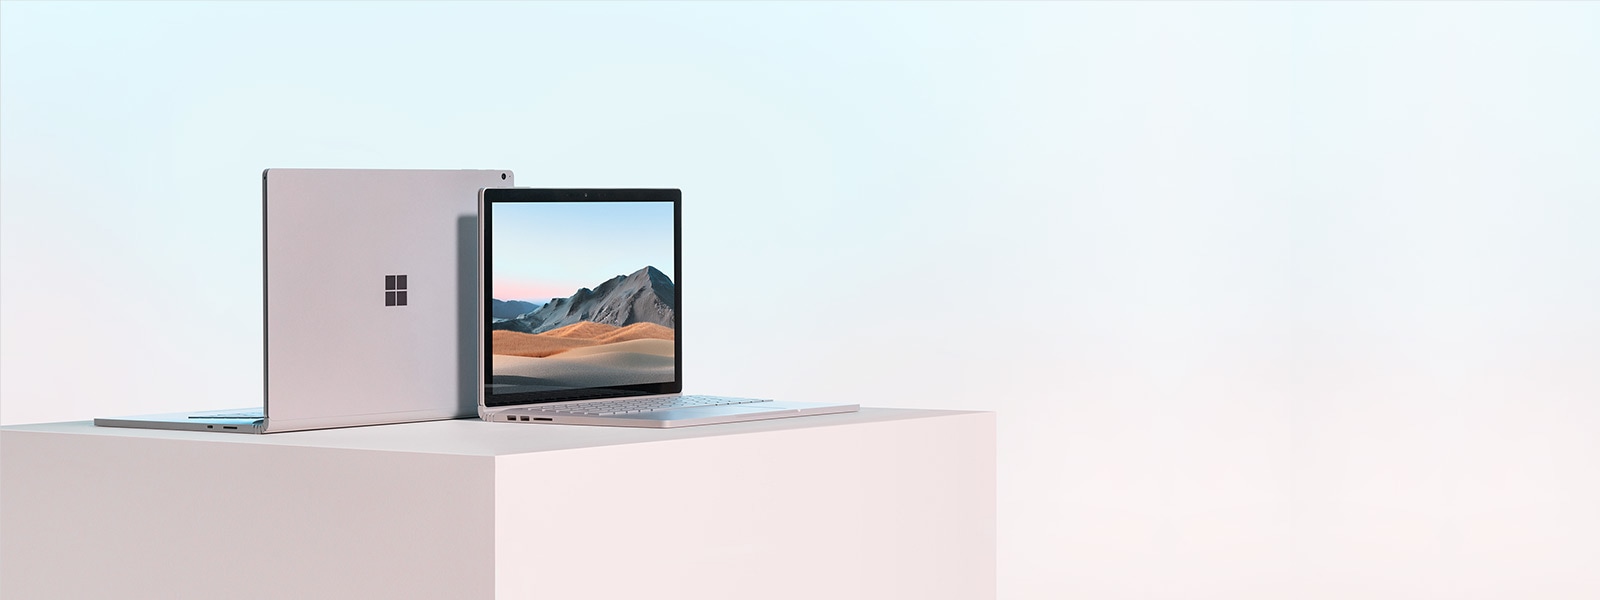 Surface Book 3 13.5” facing front and Surface Book 3 15” from behind